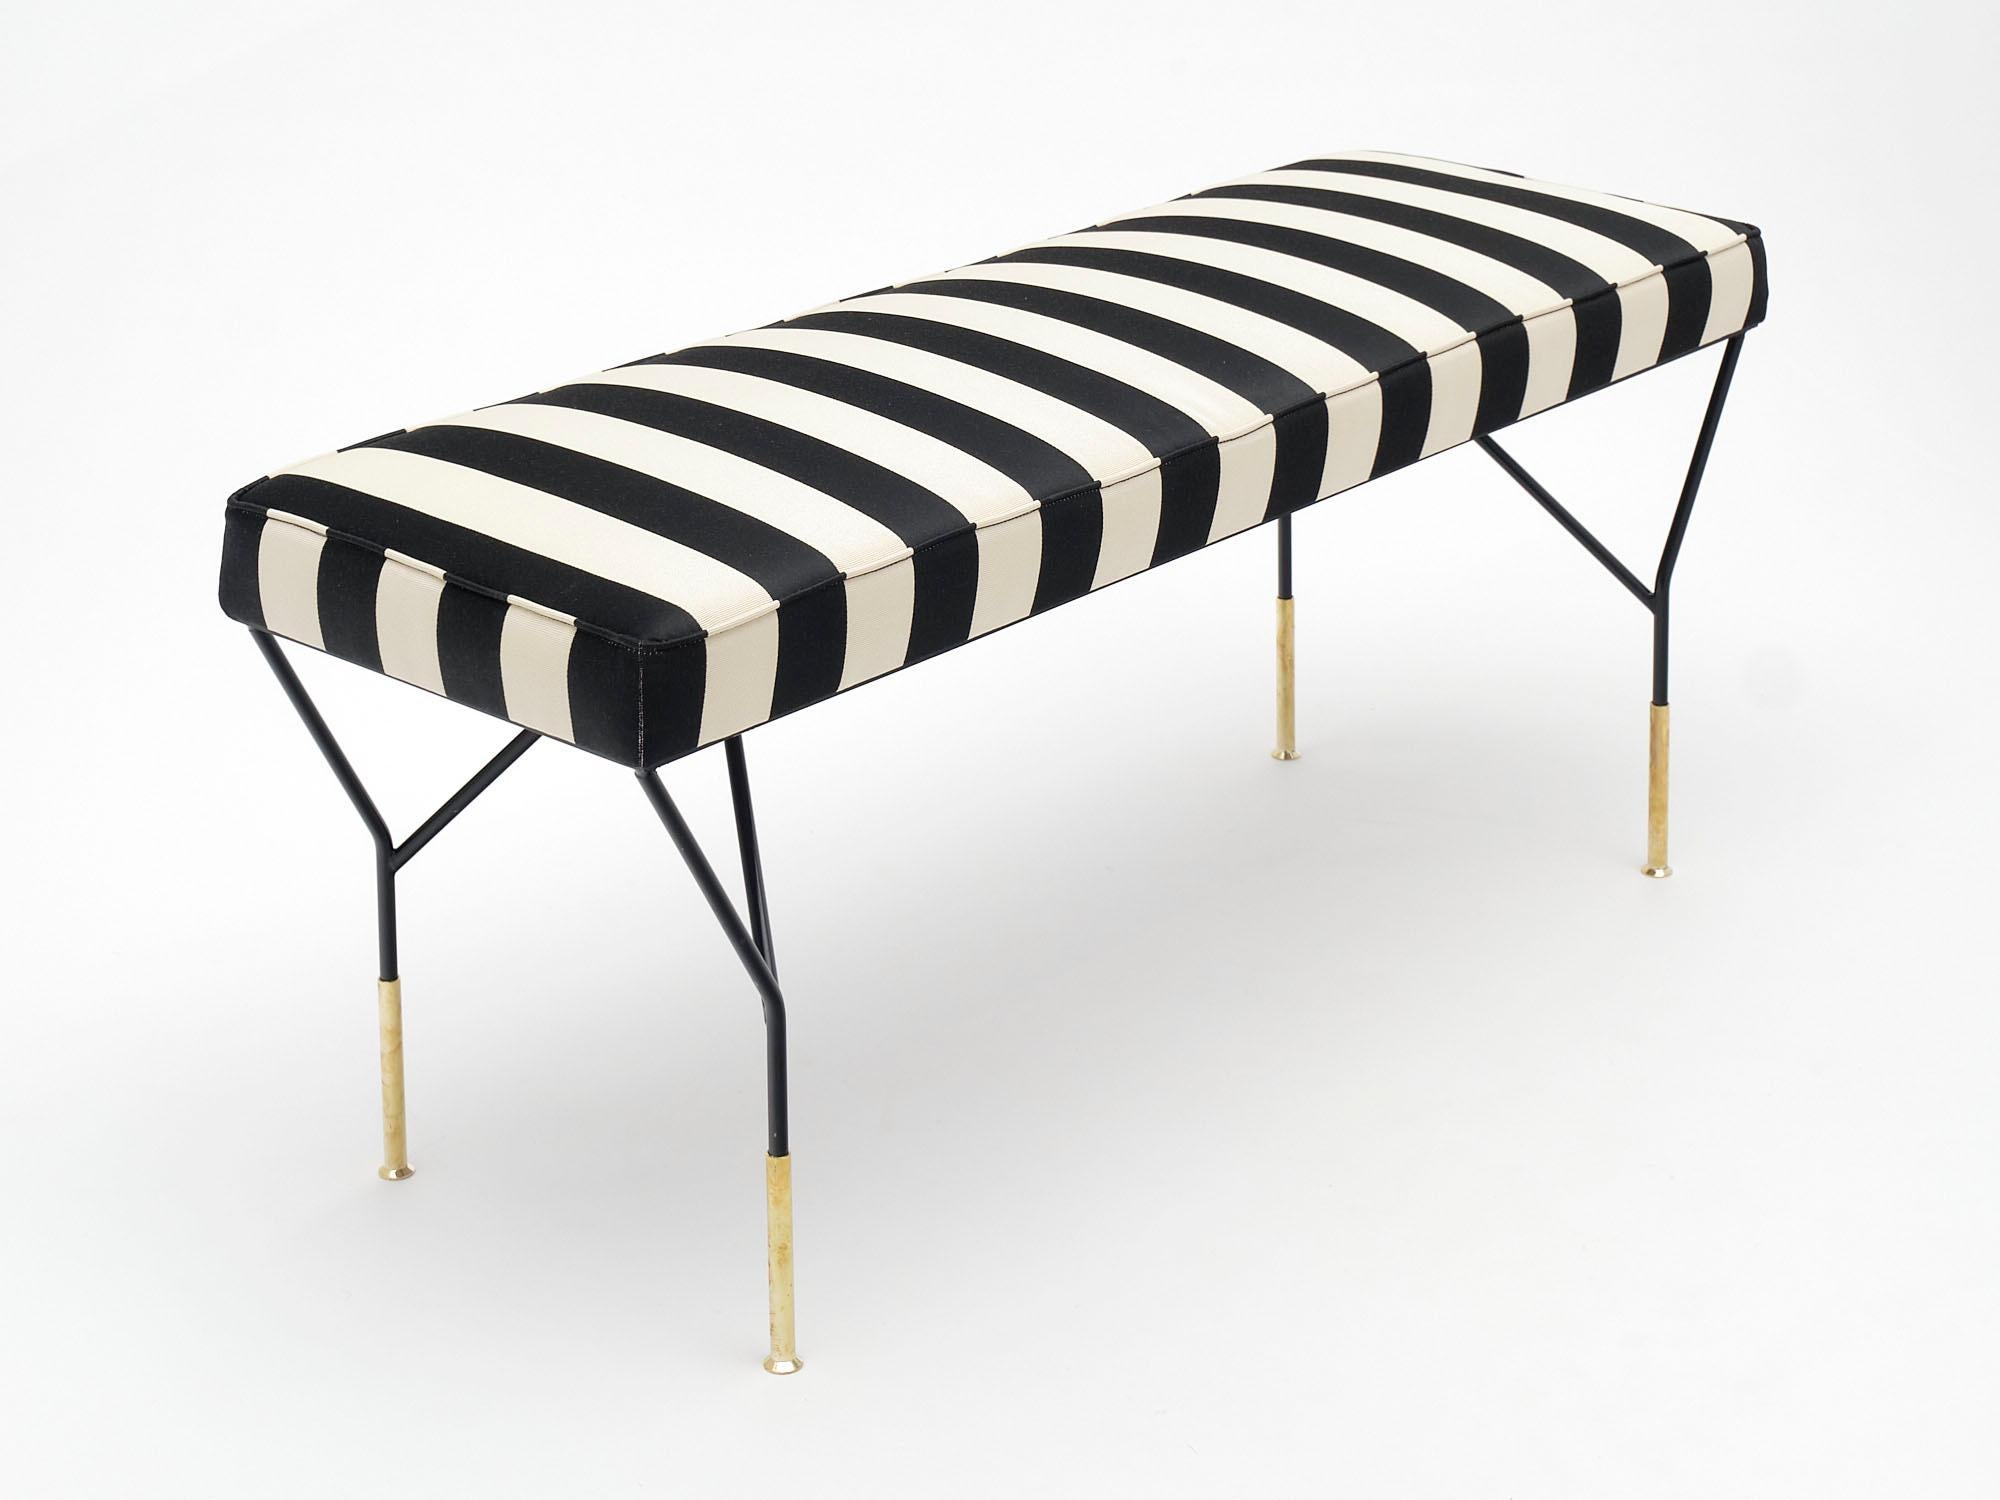 Pair of benches, Italian, vintage, of black lacquered steel and brass. New black and white striped upholstery.